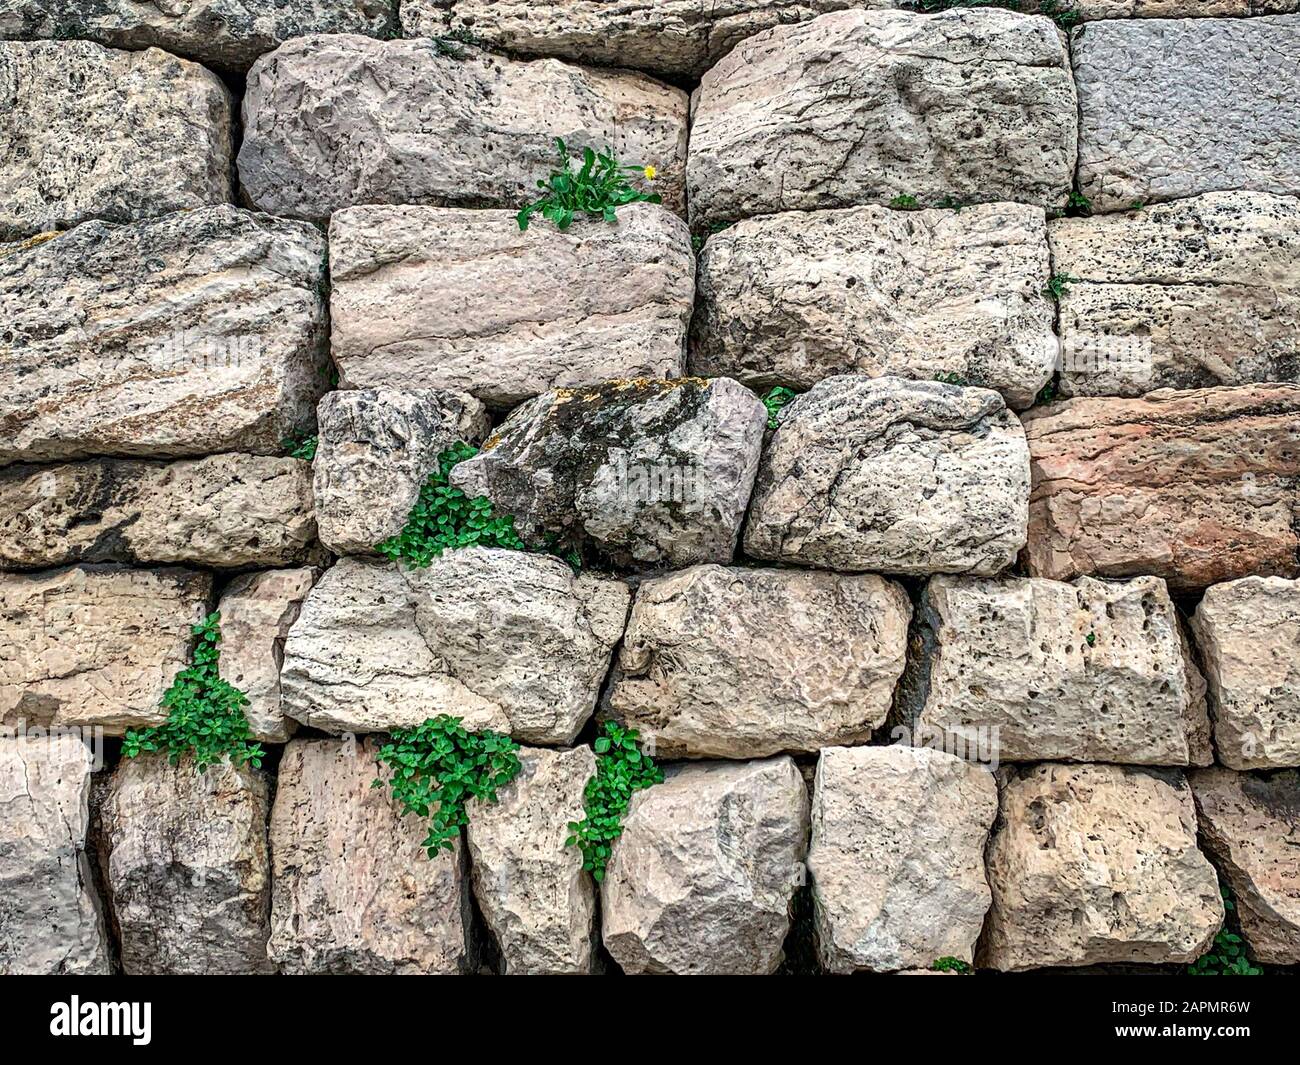 Ancient stone wall made of large limestones in Athens, Attica region in Greece. Huge antique blocks of stone piled up to form a wall. Photo. Stock Photo